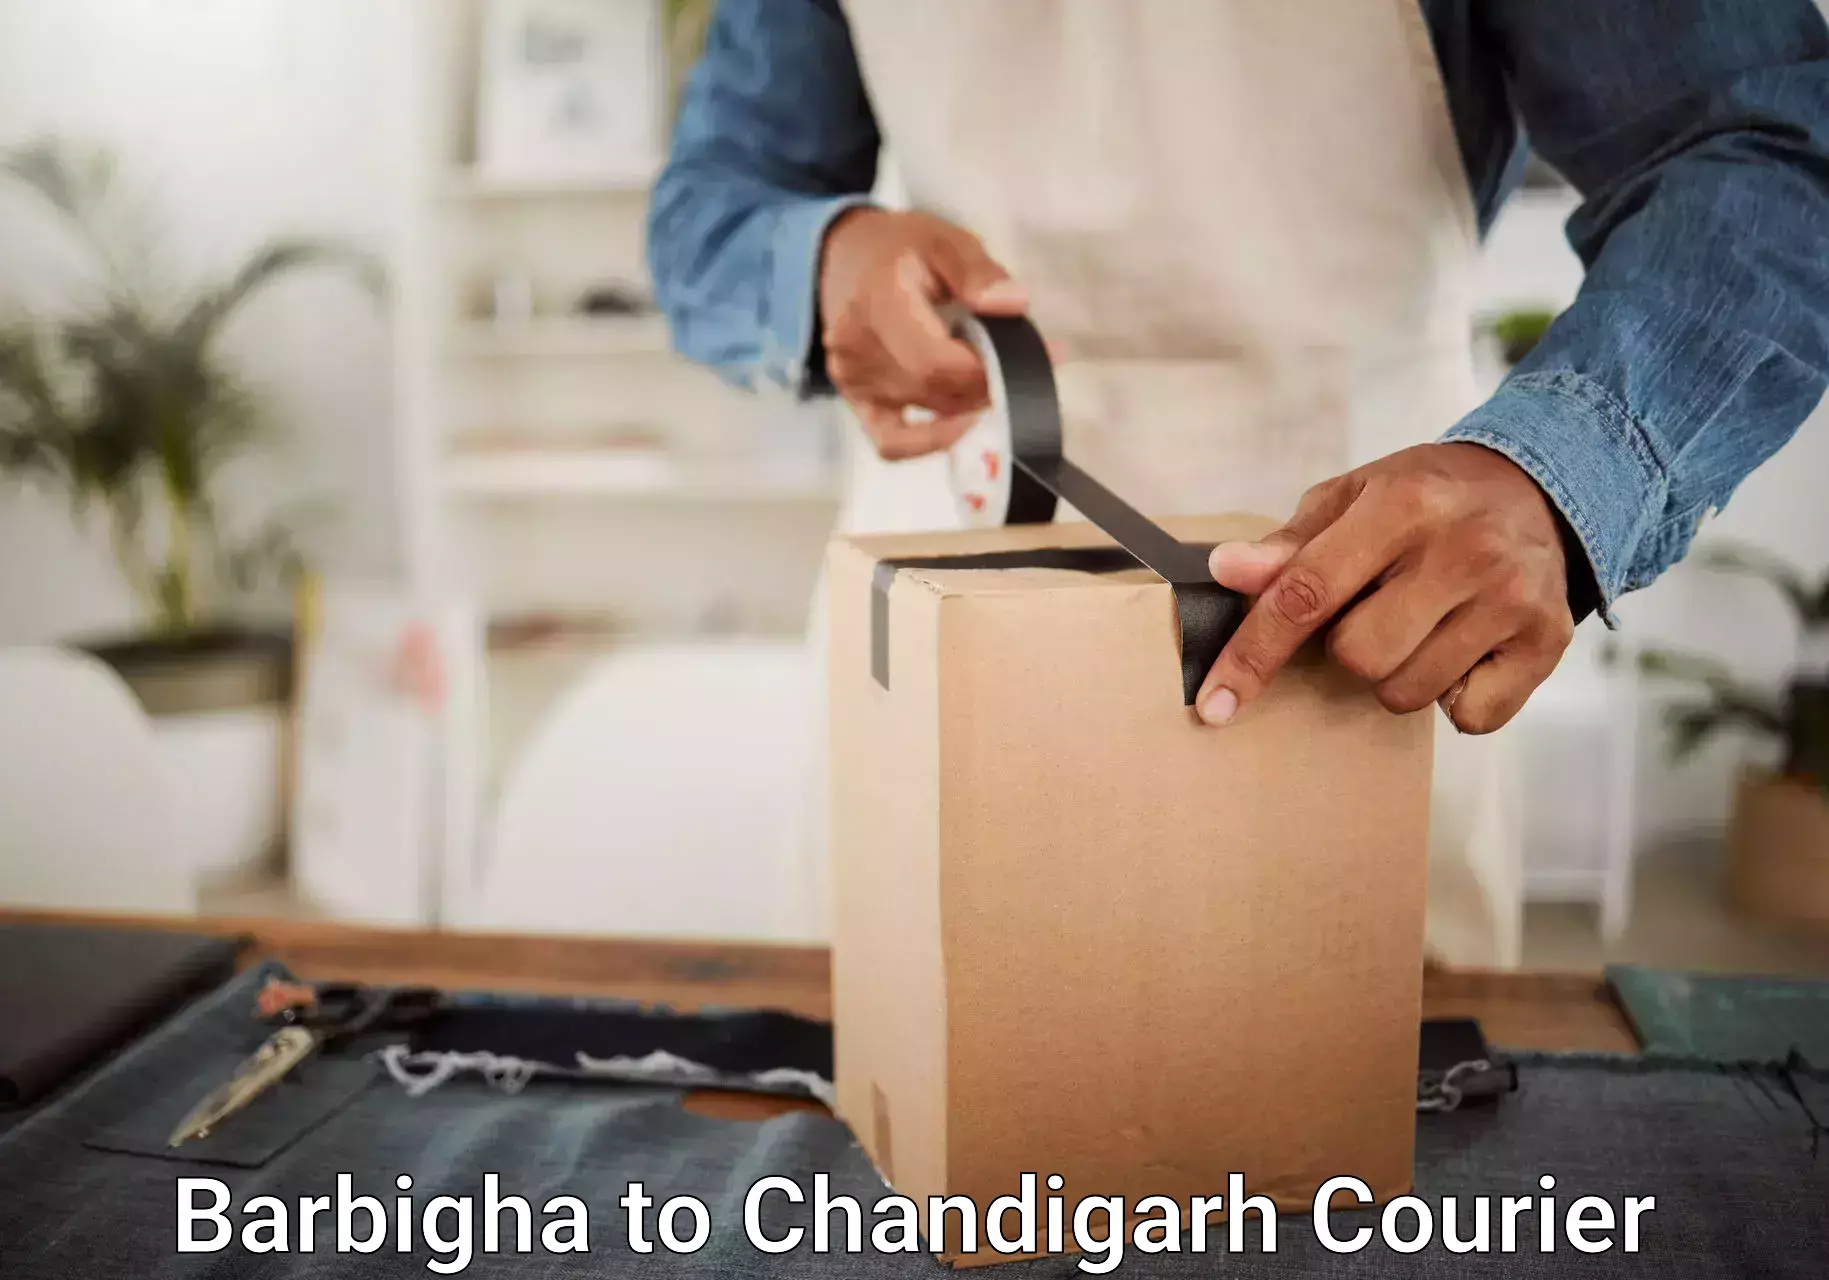 Automated luggage transport Barbigha to Chandigarh